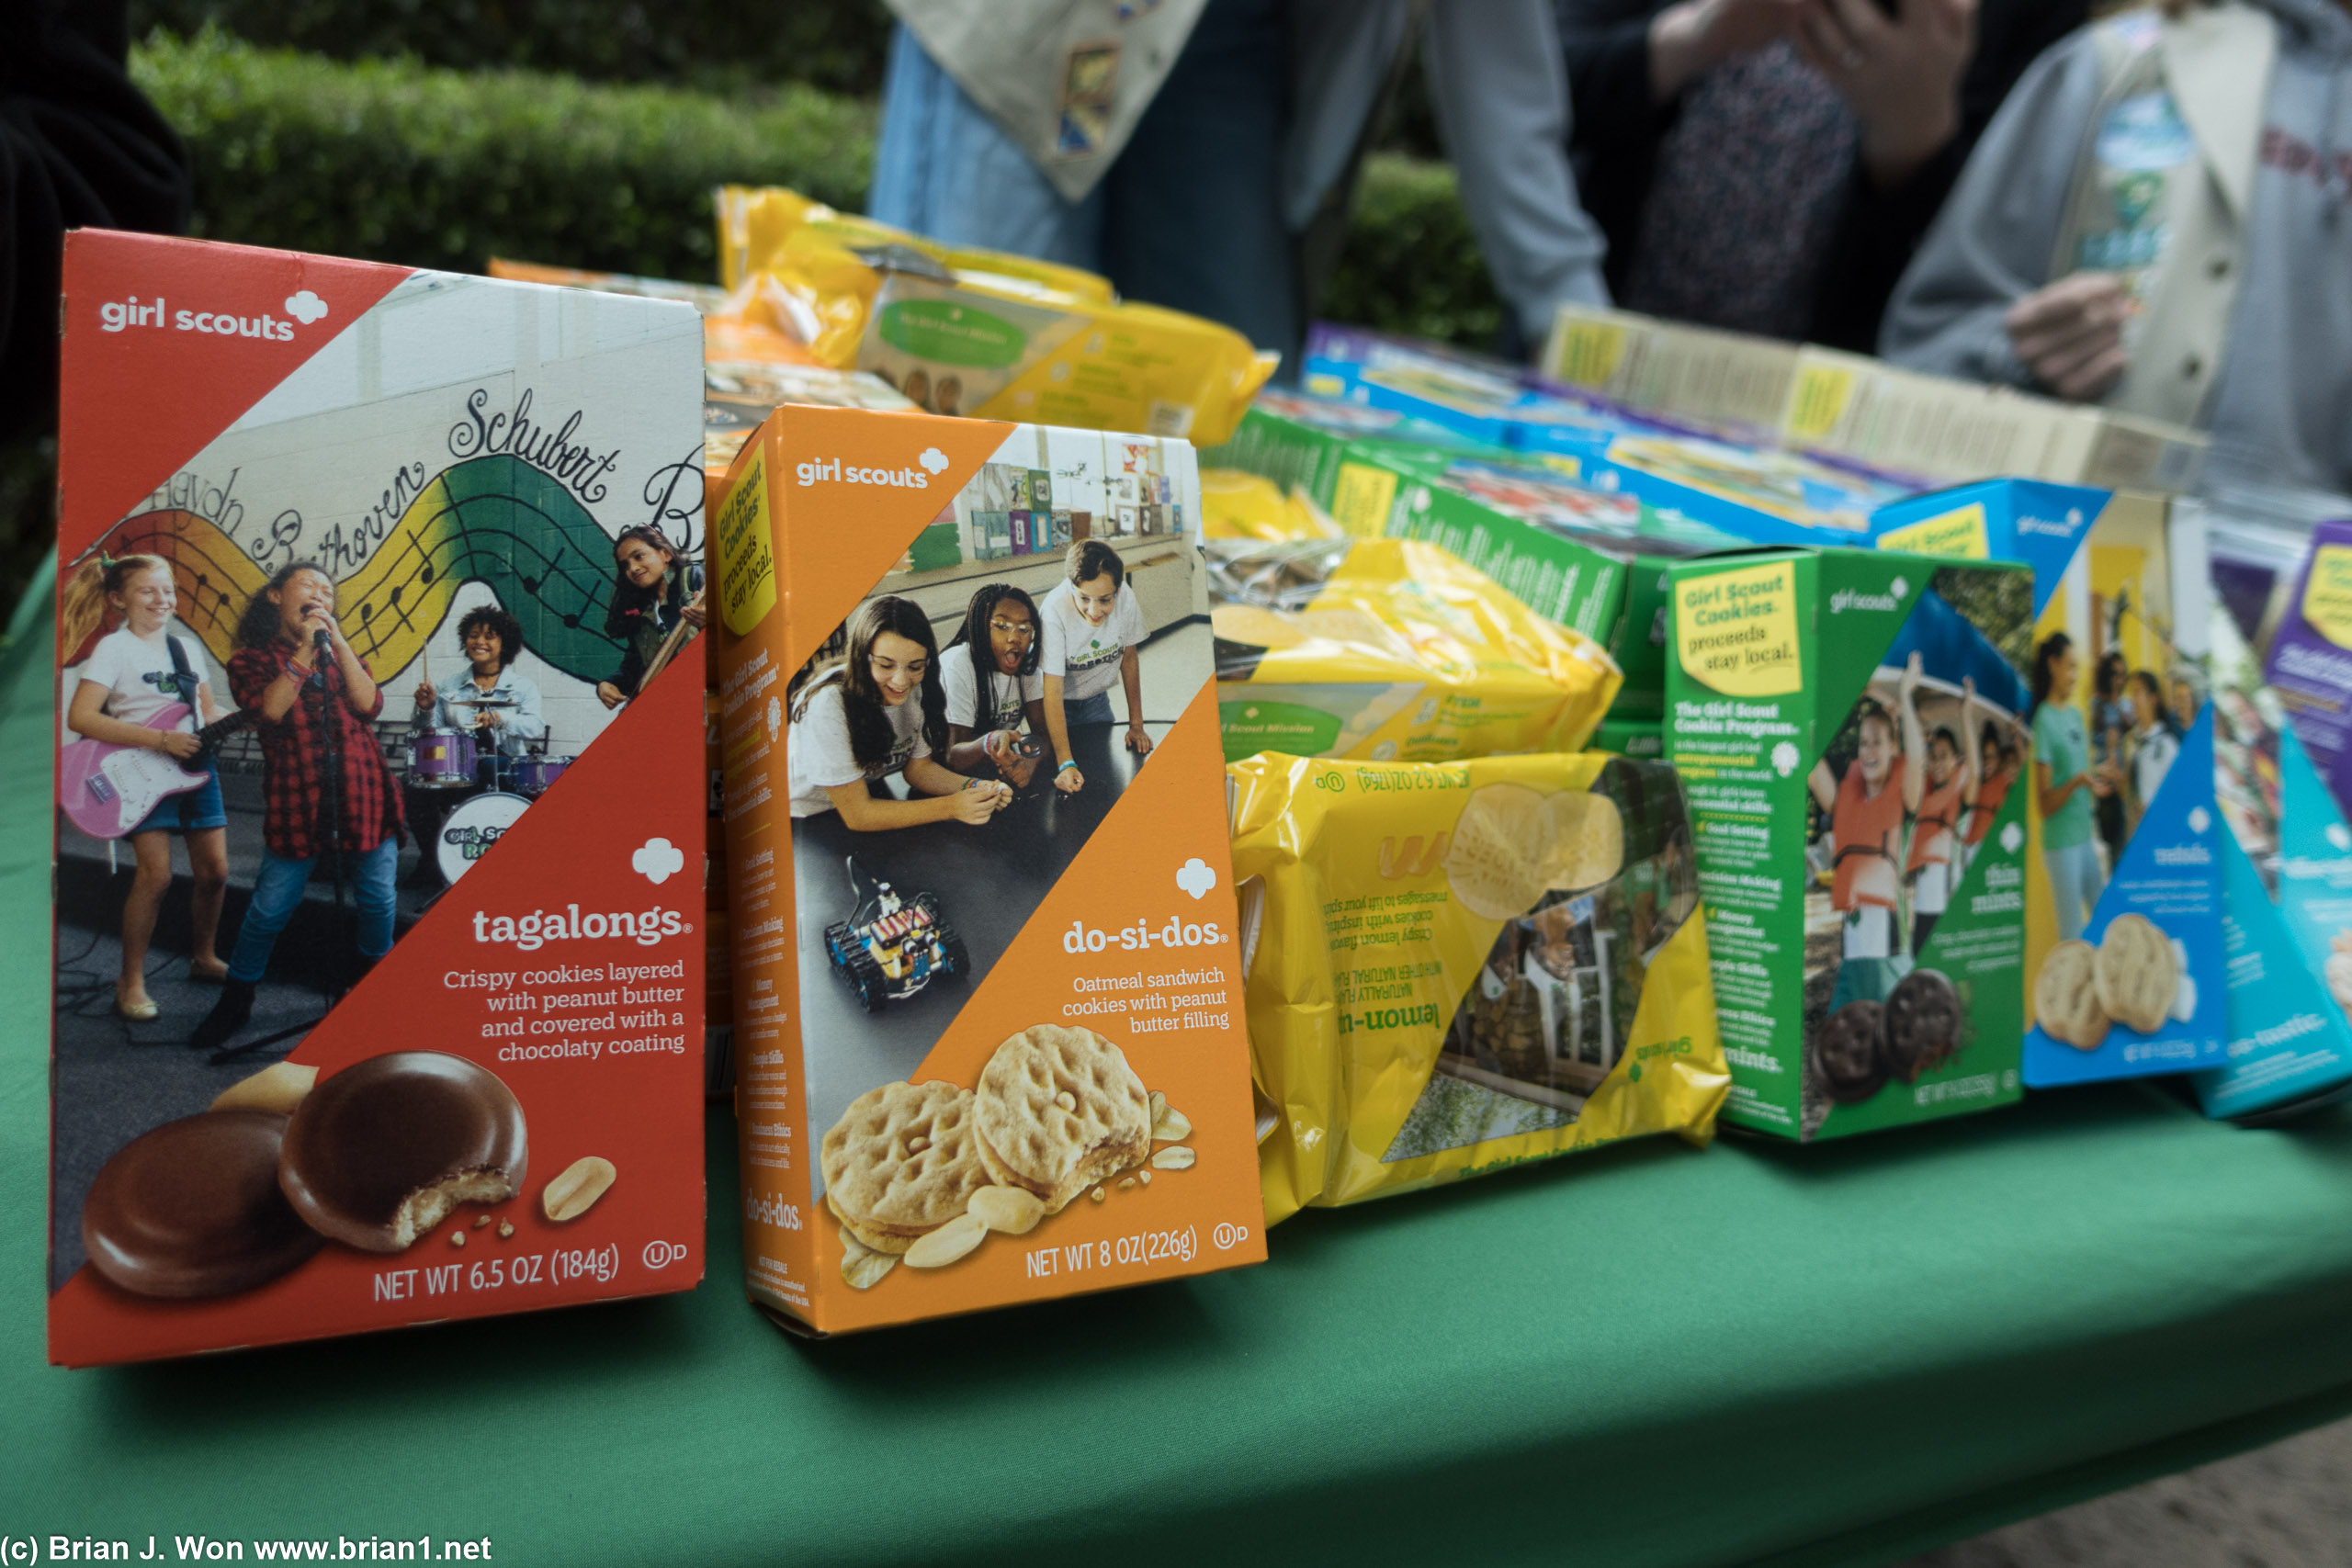 Girl Scout Cookie time has arrived.